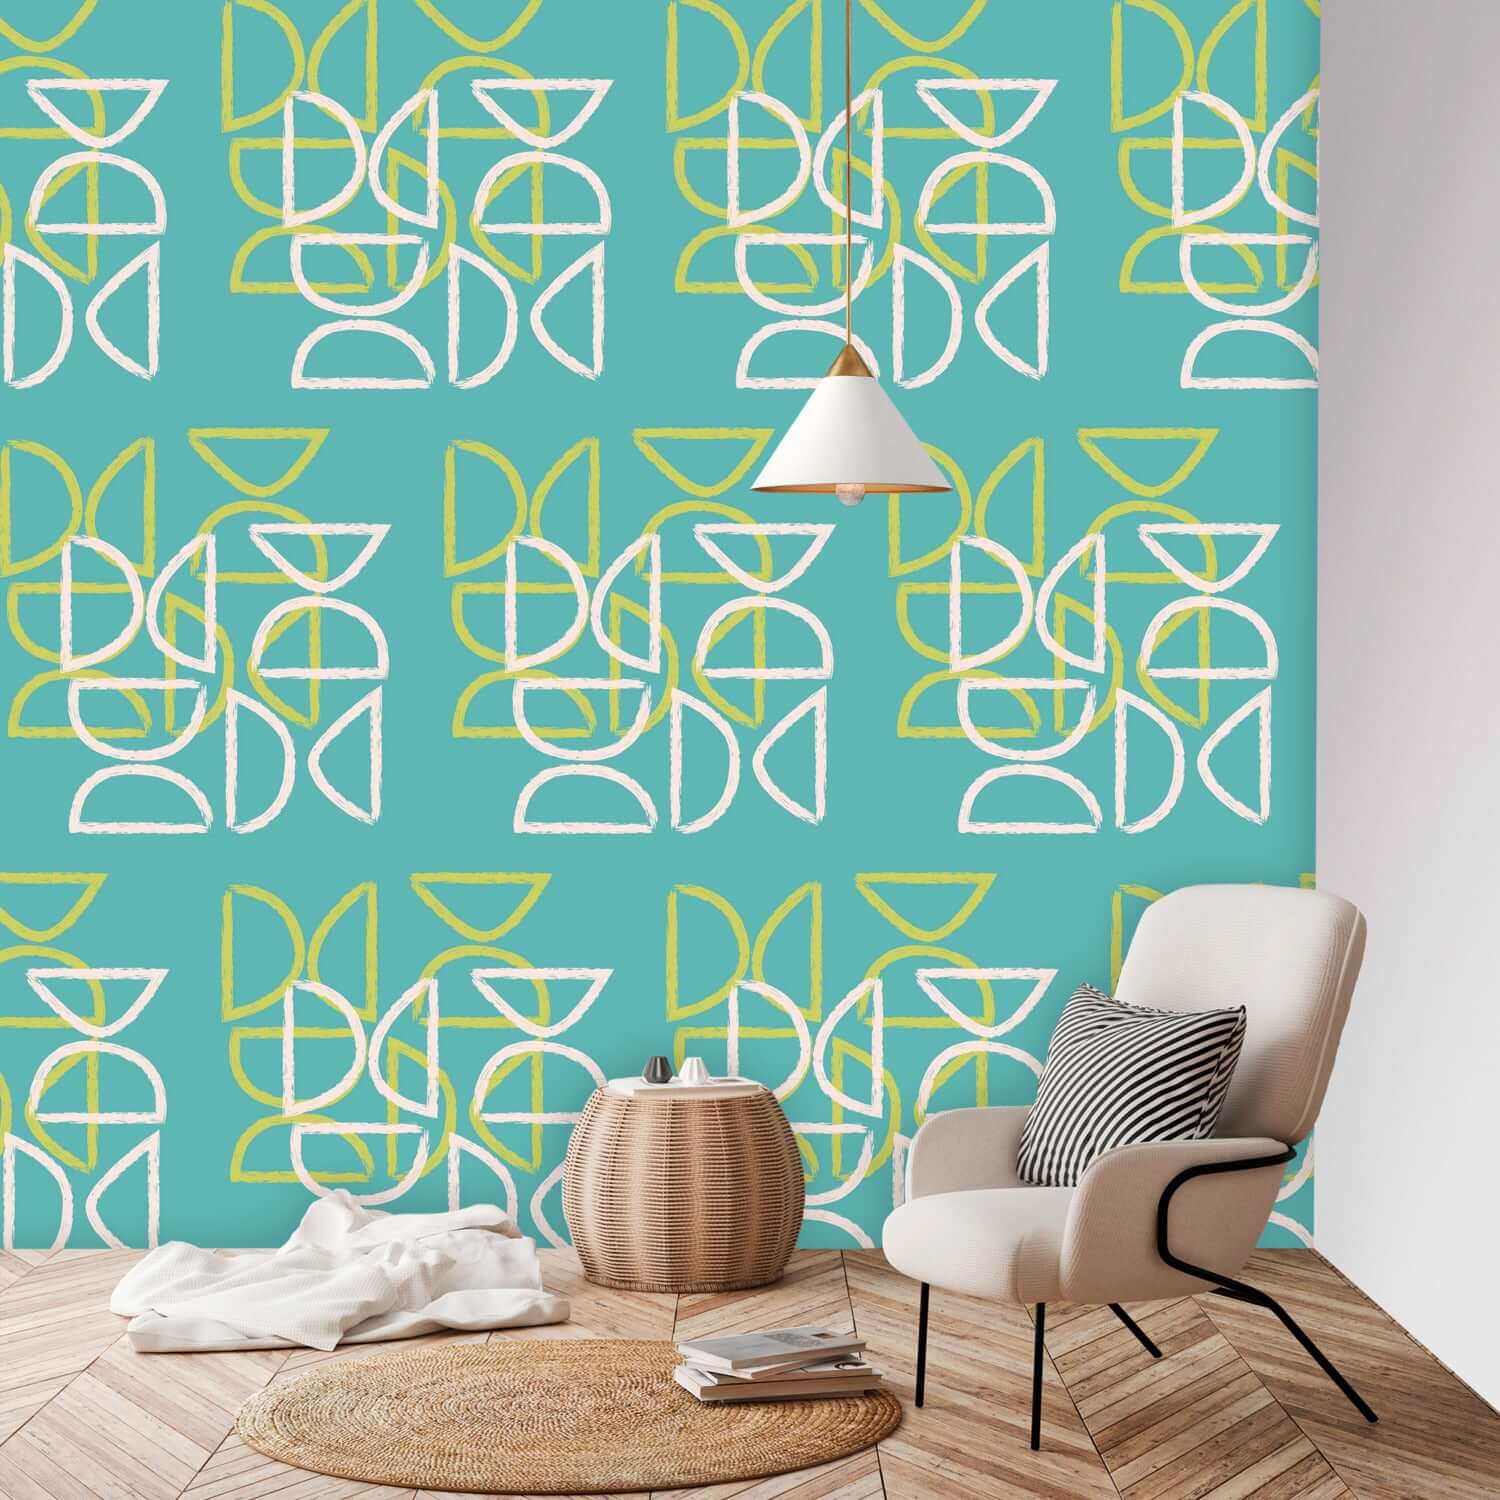 Tiki Wall Mural, Peel And Stick , Teal Blue,  Abstract, Mid Century Modern Wall Murals Wall Paper H96 x W100